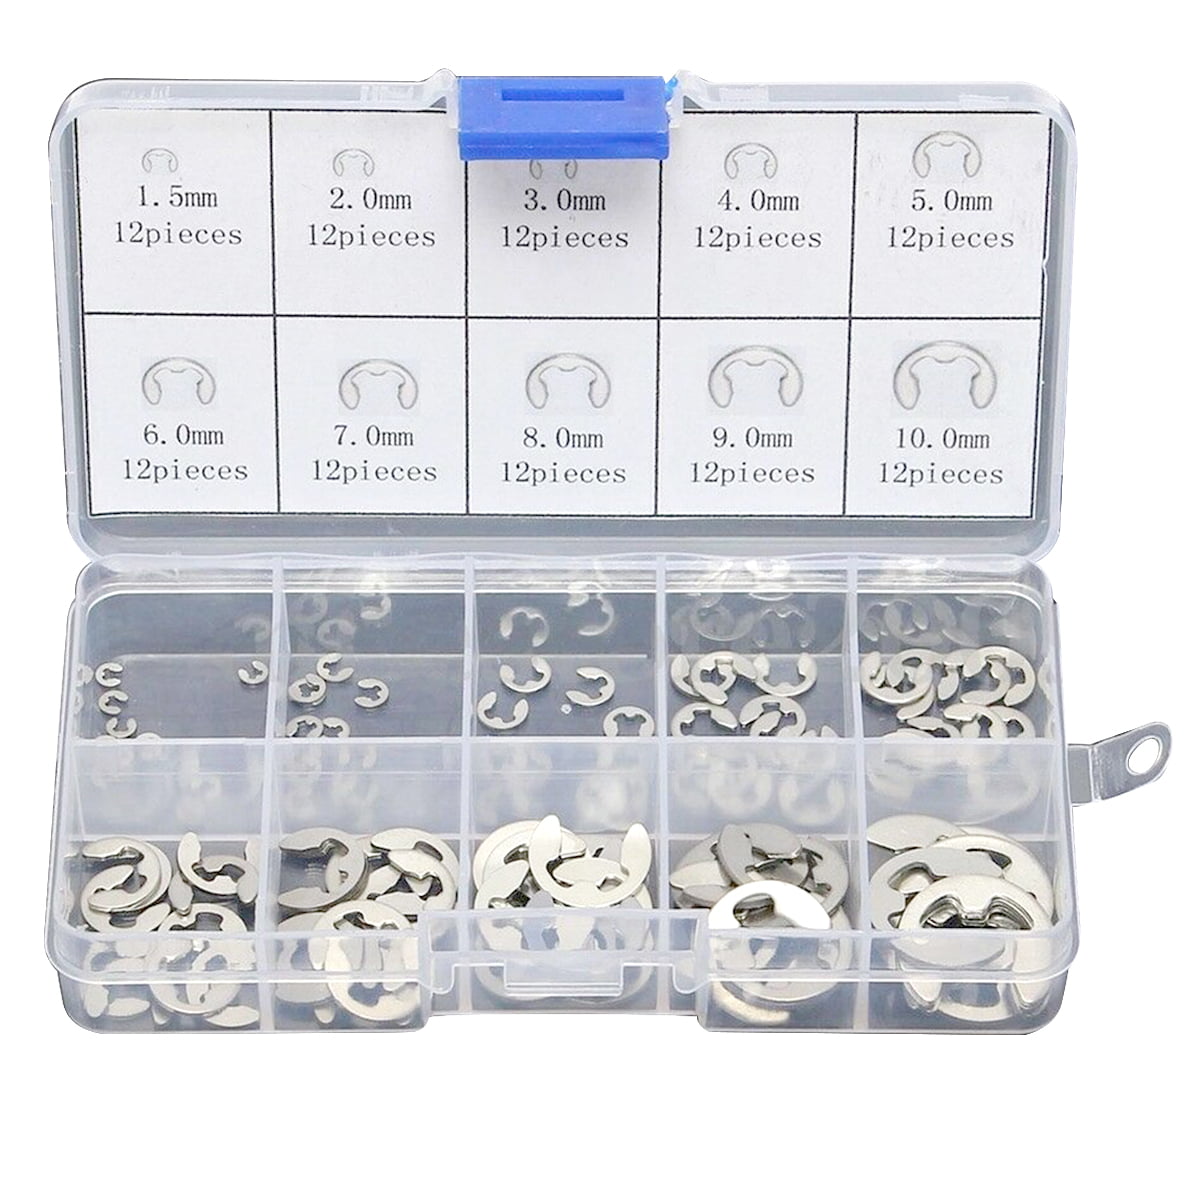 120Pcs 1.5mm-10mm Stainless Steel E-Clip Assortment Retaining Snap Ring Circlip Kit for Shaft Groove of Industrial Machine E-Clips Set 